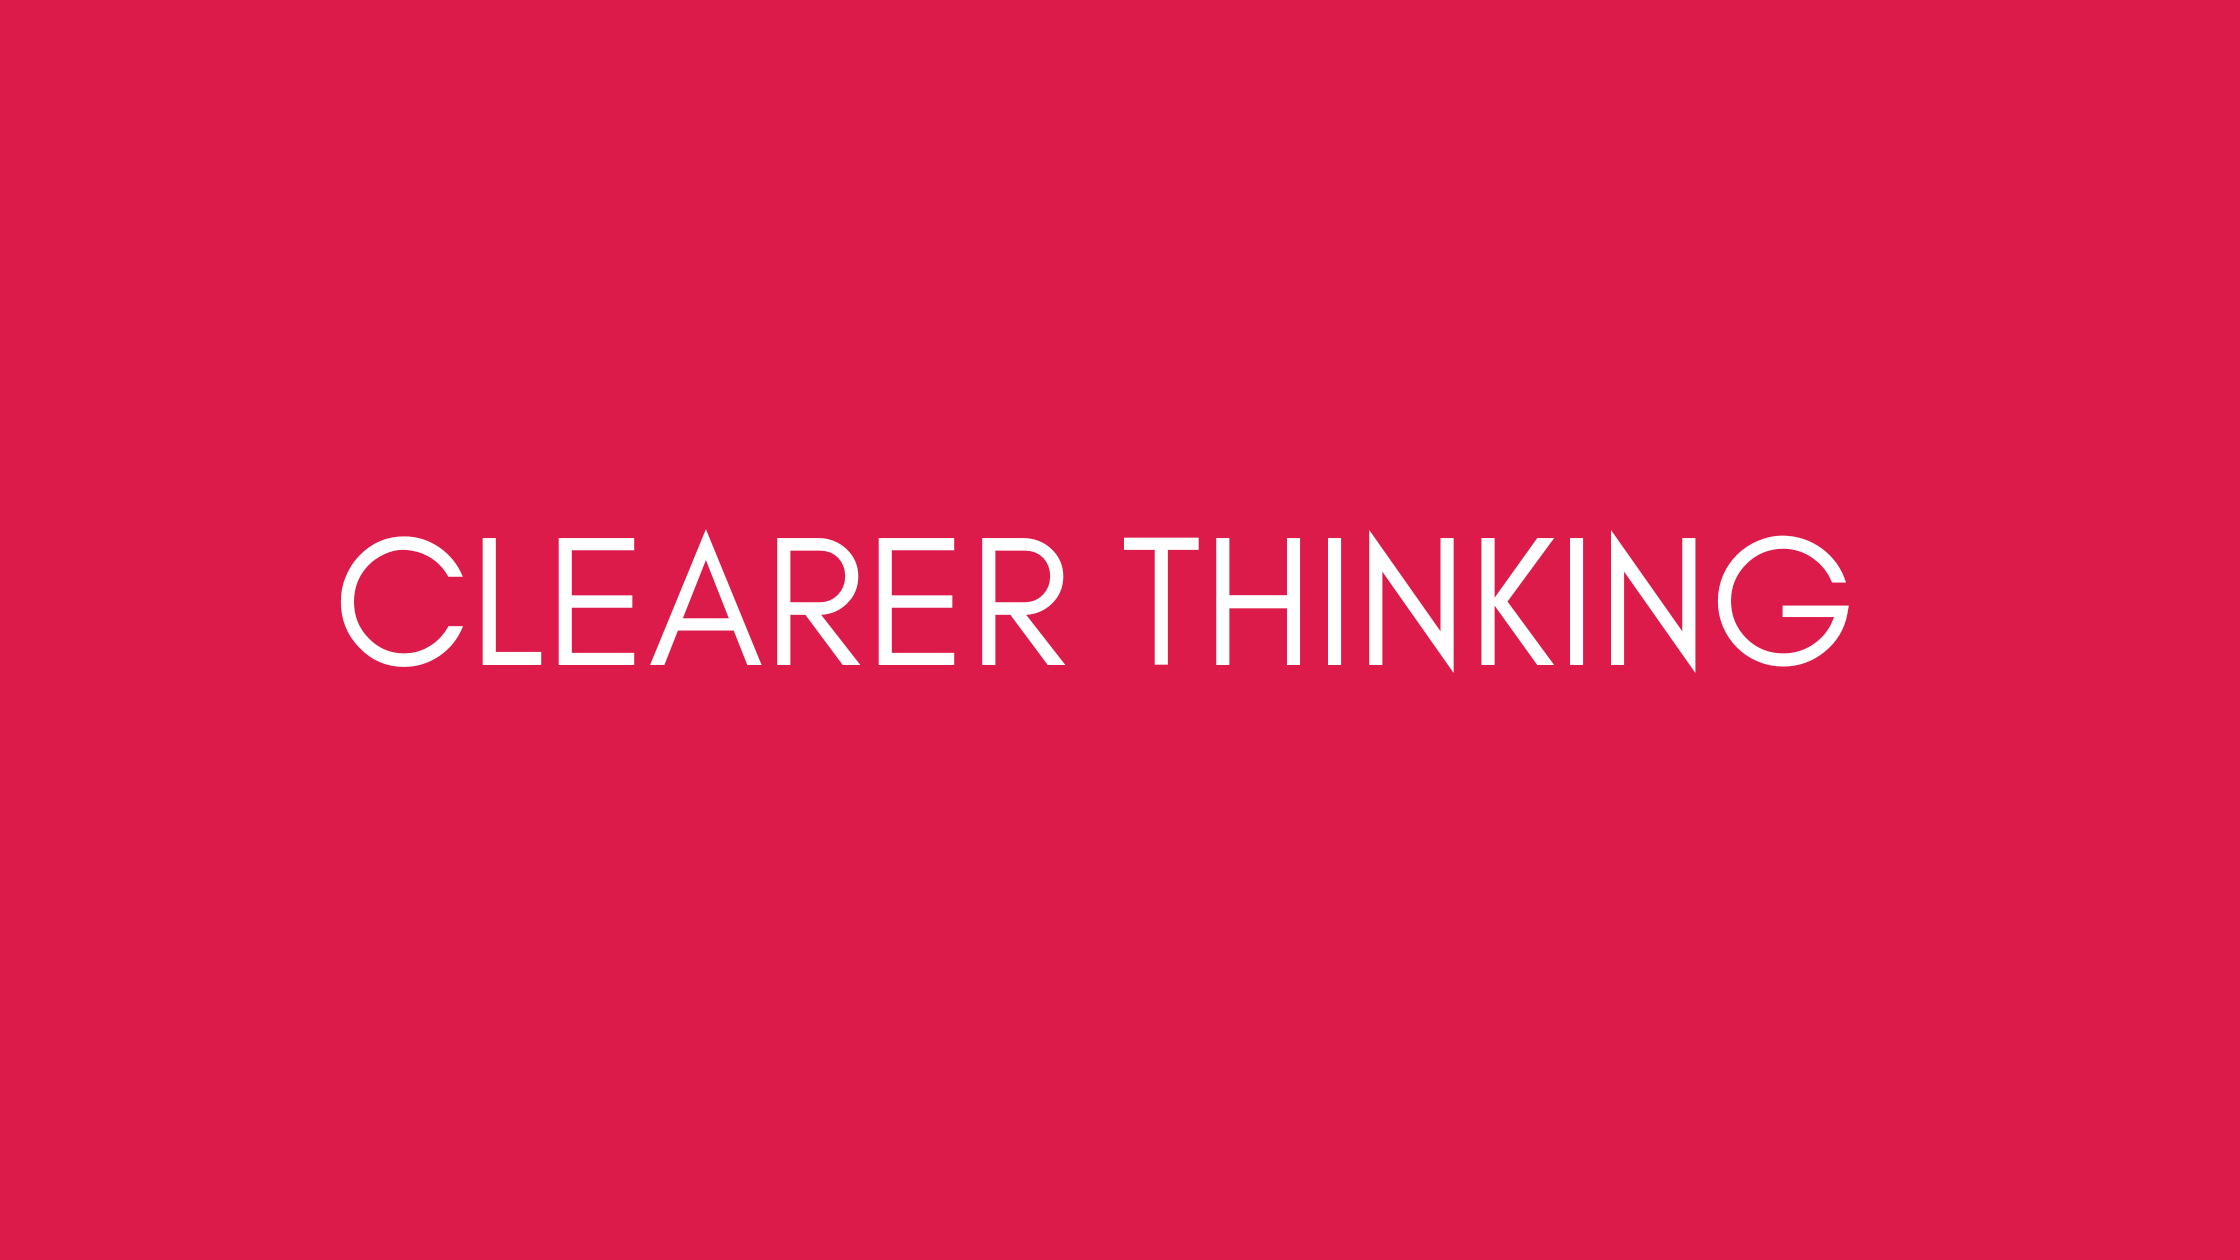 CLEARER THINKING